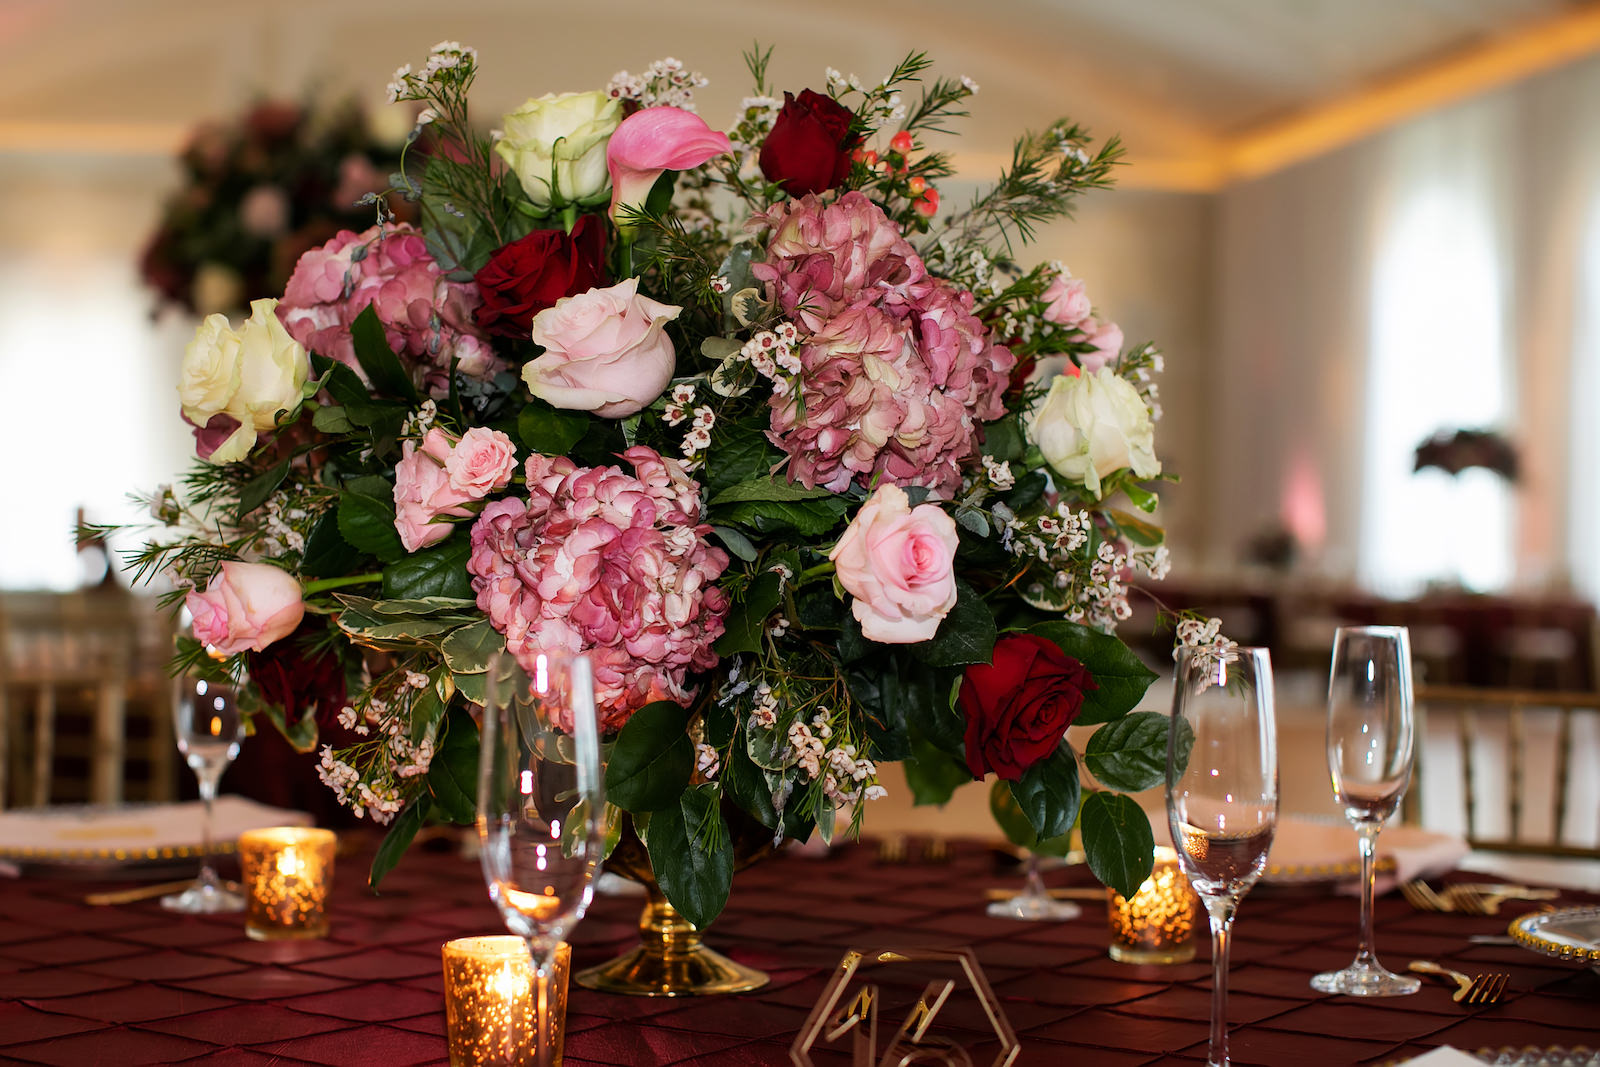 Lush Burgundy, Pink and White Roses and Greenery Floral Centerpieces for Garden Inspired Wedding | Tampa Bay Wedding Photographer Limelight Photography | Florist Lemon Drops | Planner Breezin Weddings